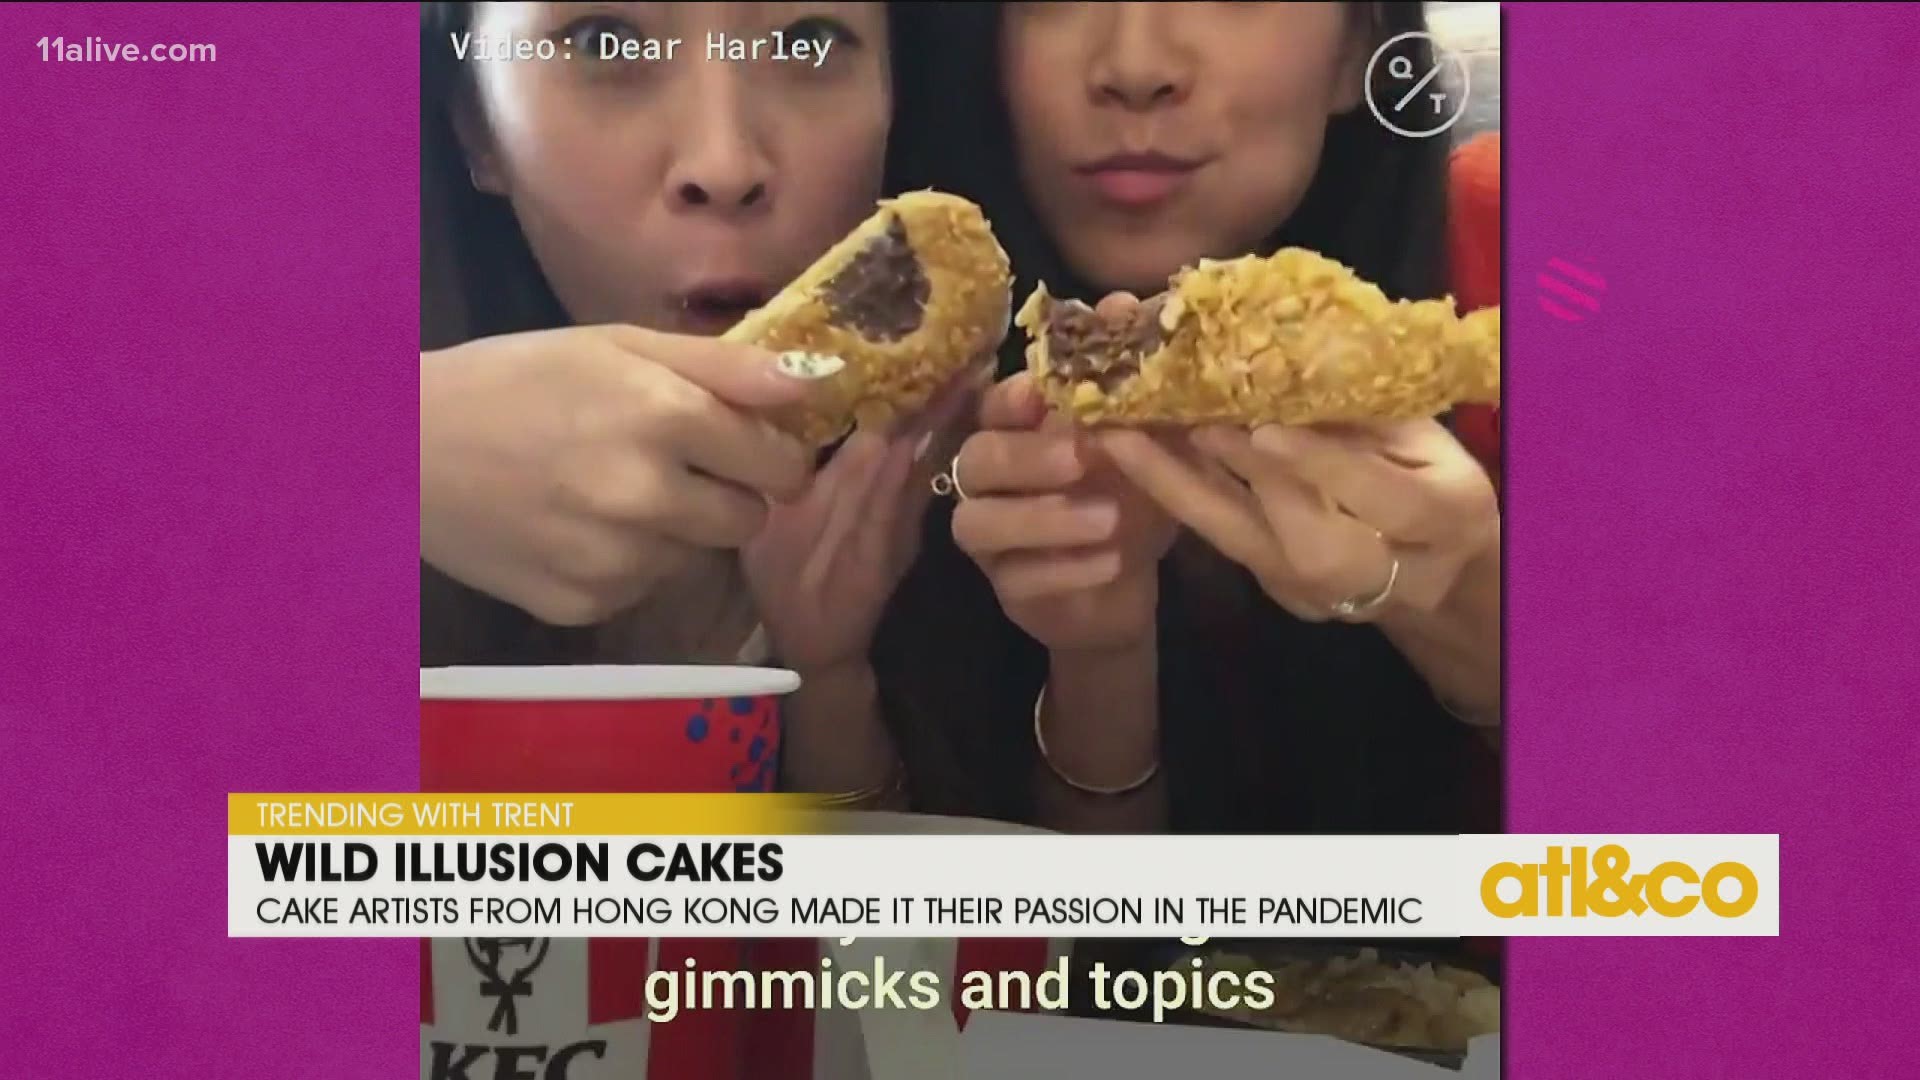 Wild illusion cakes! Trending with Trent introduces you to Hong Kong cake artists Cony and Alison from Dear Harley.